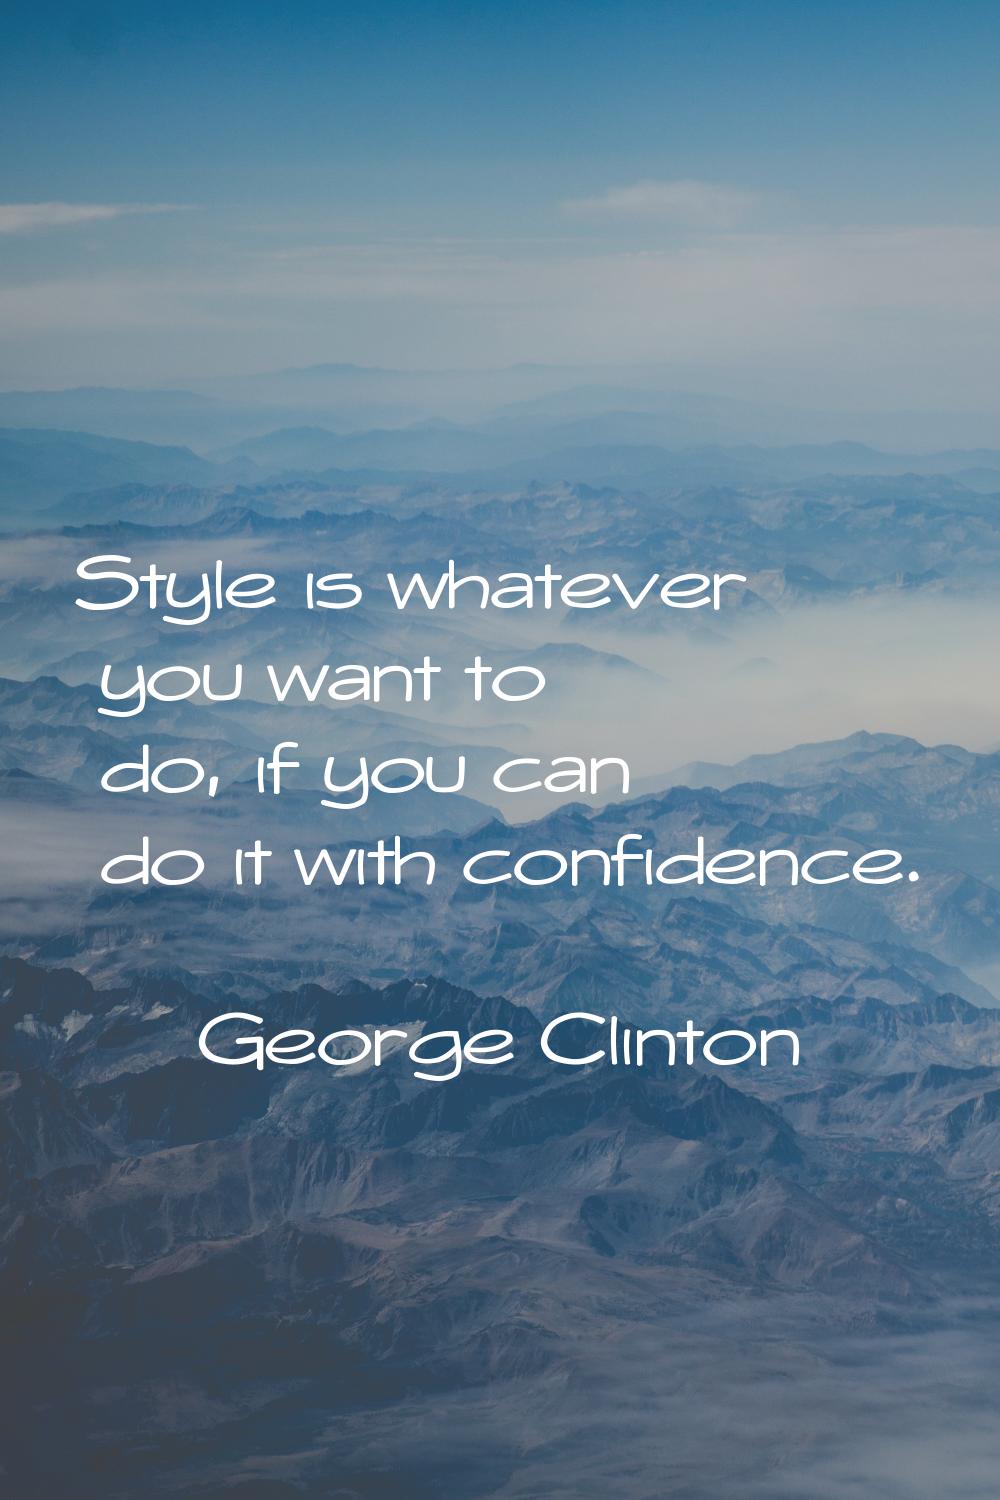 Style is whatever you want to do, if you can do it with confidence.